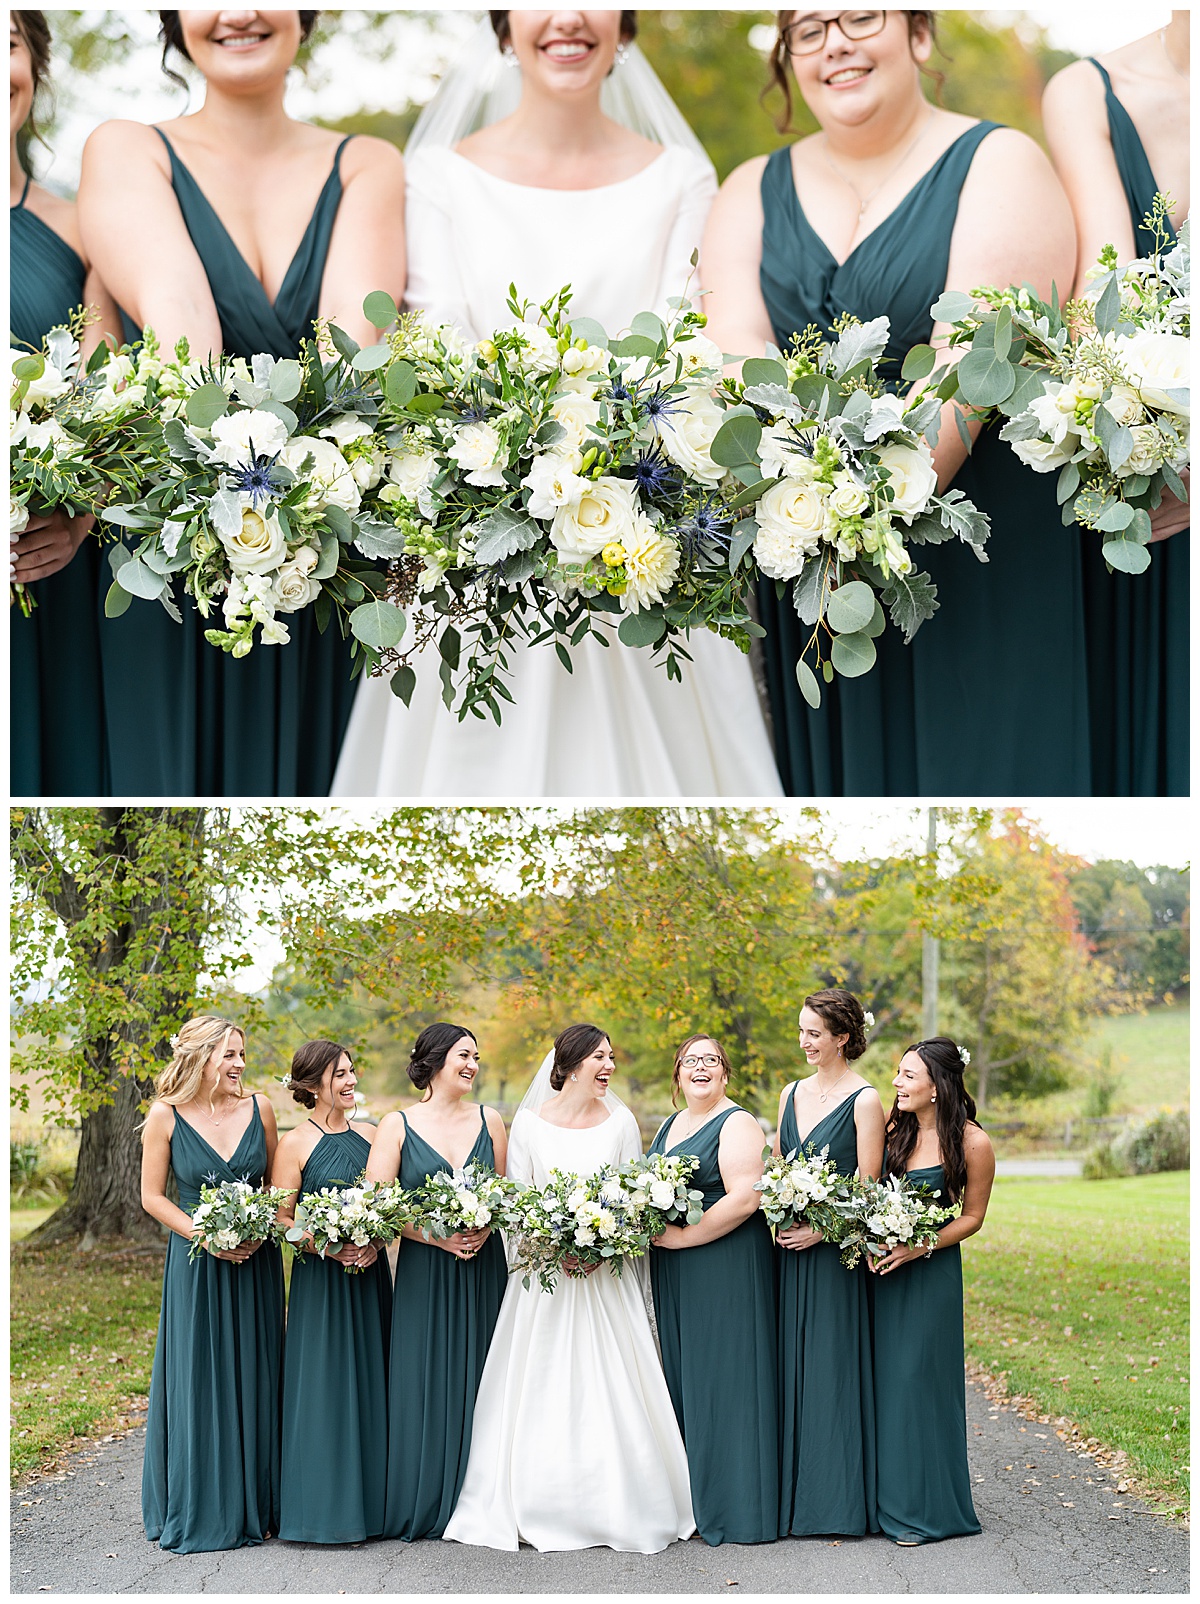 Stefanie Kamerman Photography - A Hunter Green and White Themed Wedding - Manor at Airmont - Round Hill, Virginia_0032.jpg